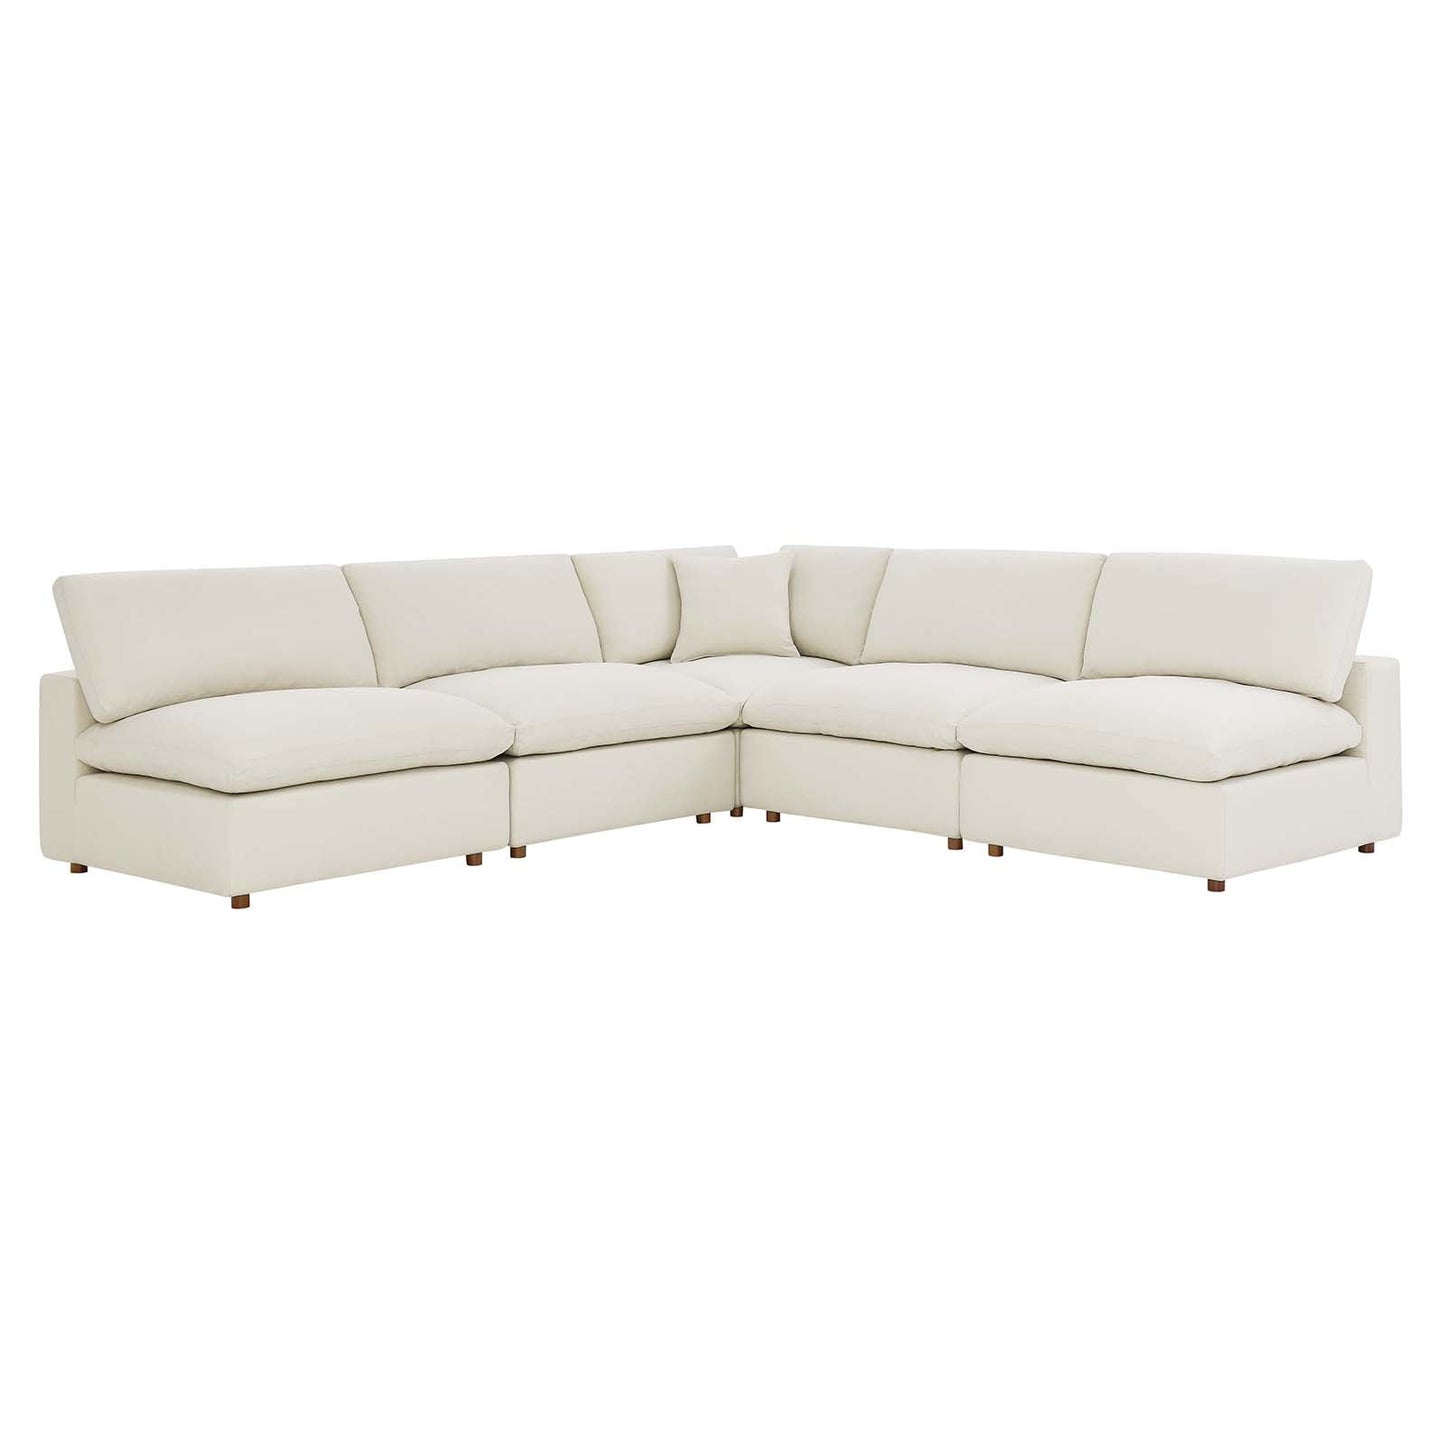 Connie Down Filled Overstuffed 5-Piece Armless Sectional Sofa